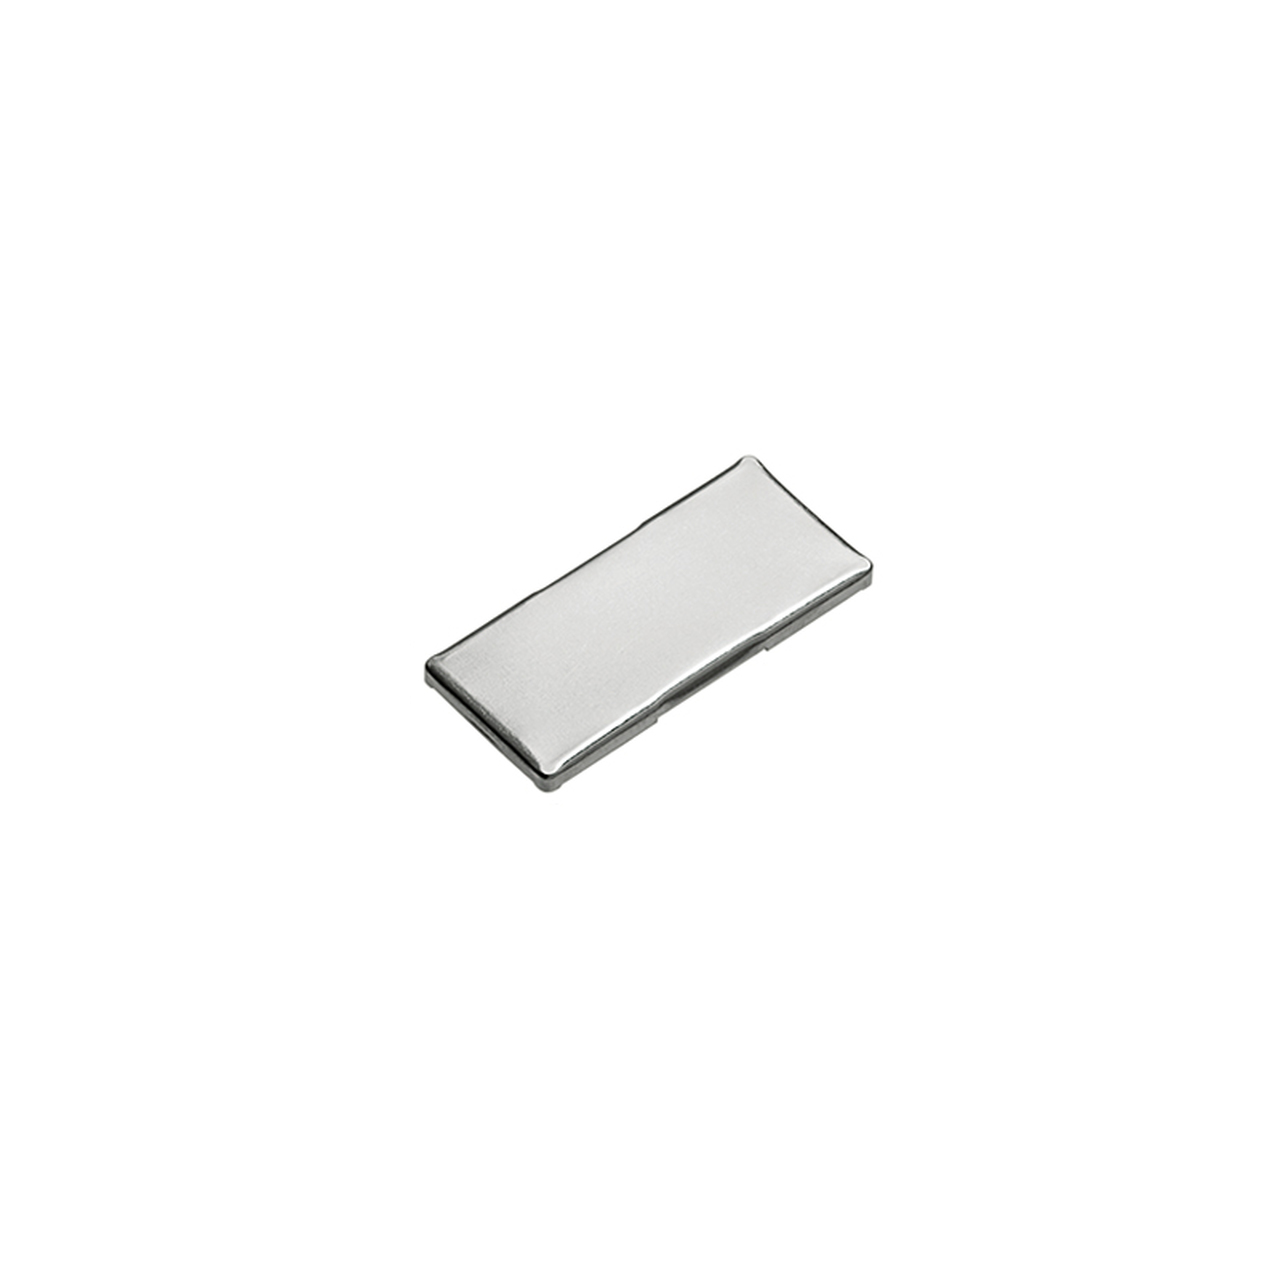 Clip Top Straight Hinge Arm Cover Cap - Wide Angled Application - Nickel Plate